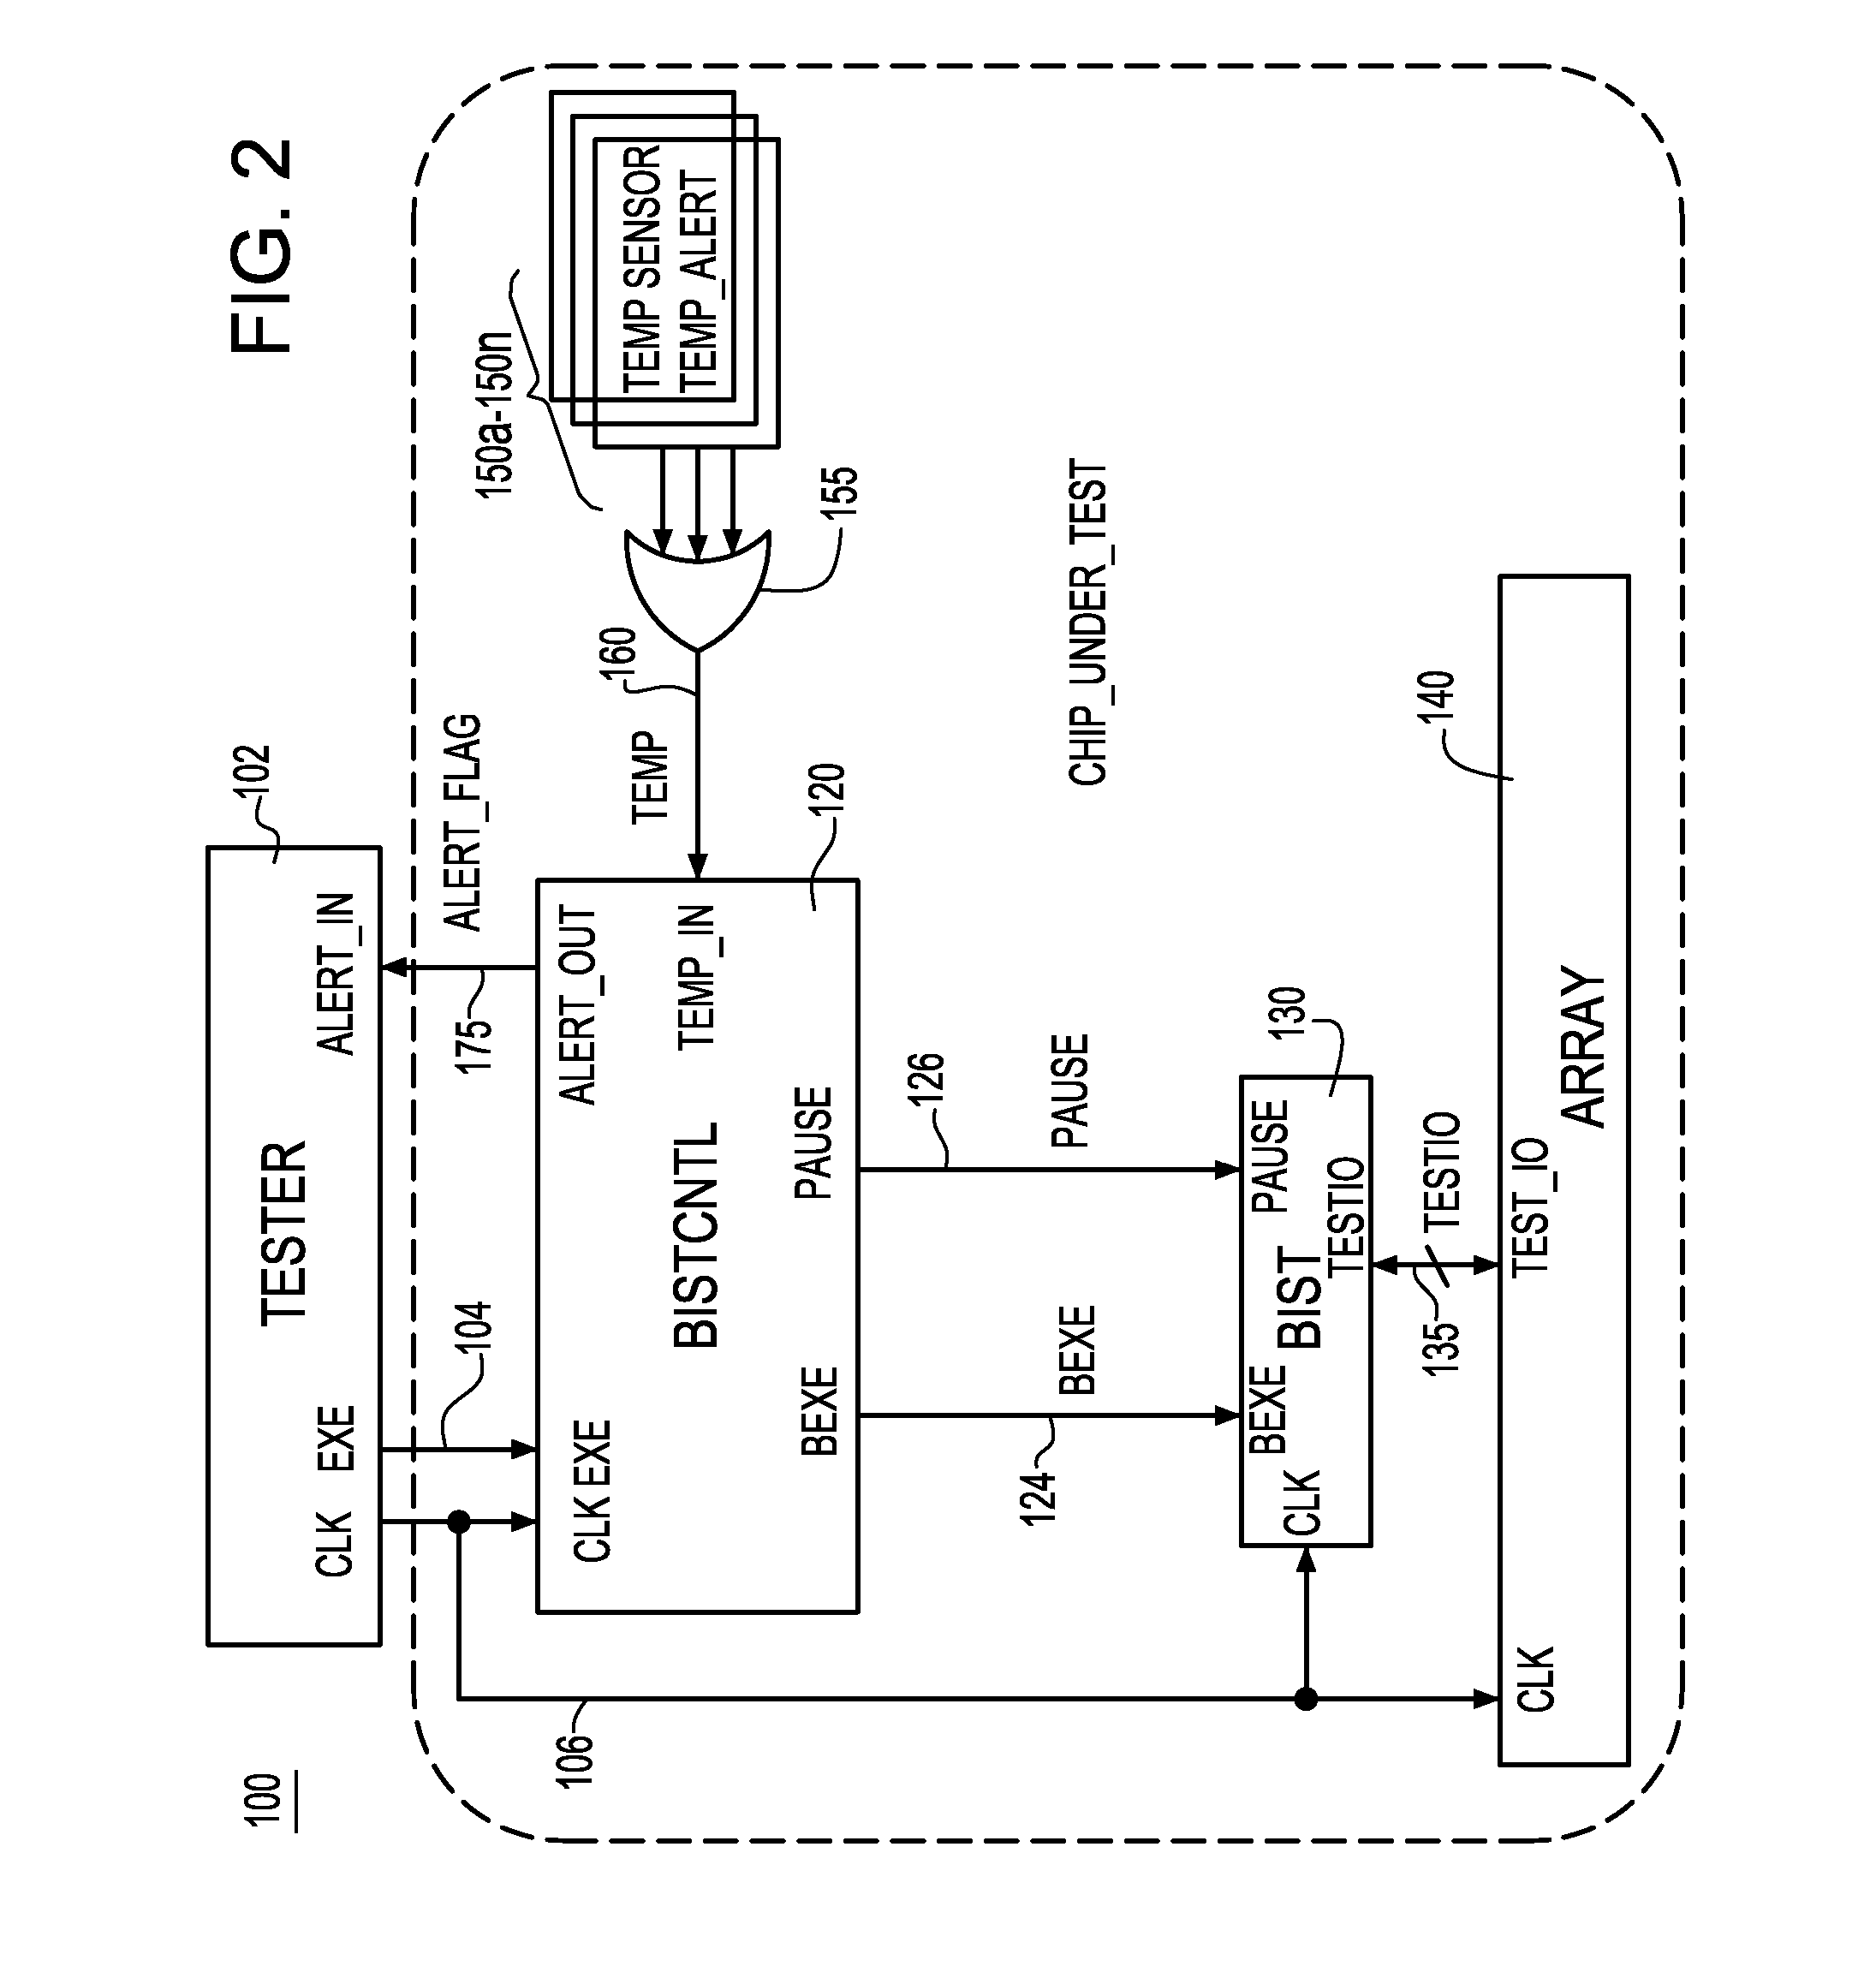 Automatic shutdown or throttling of a bist state machine using thermal feedback